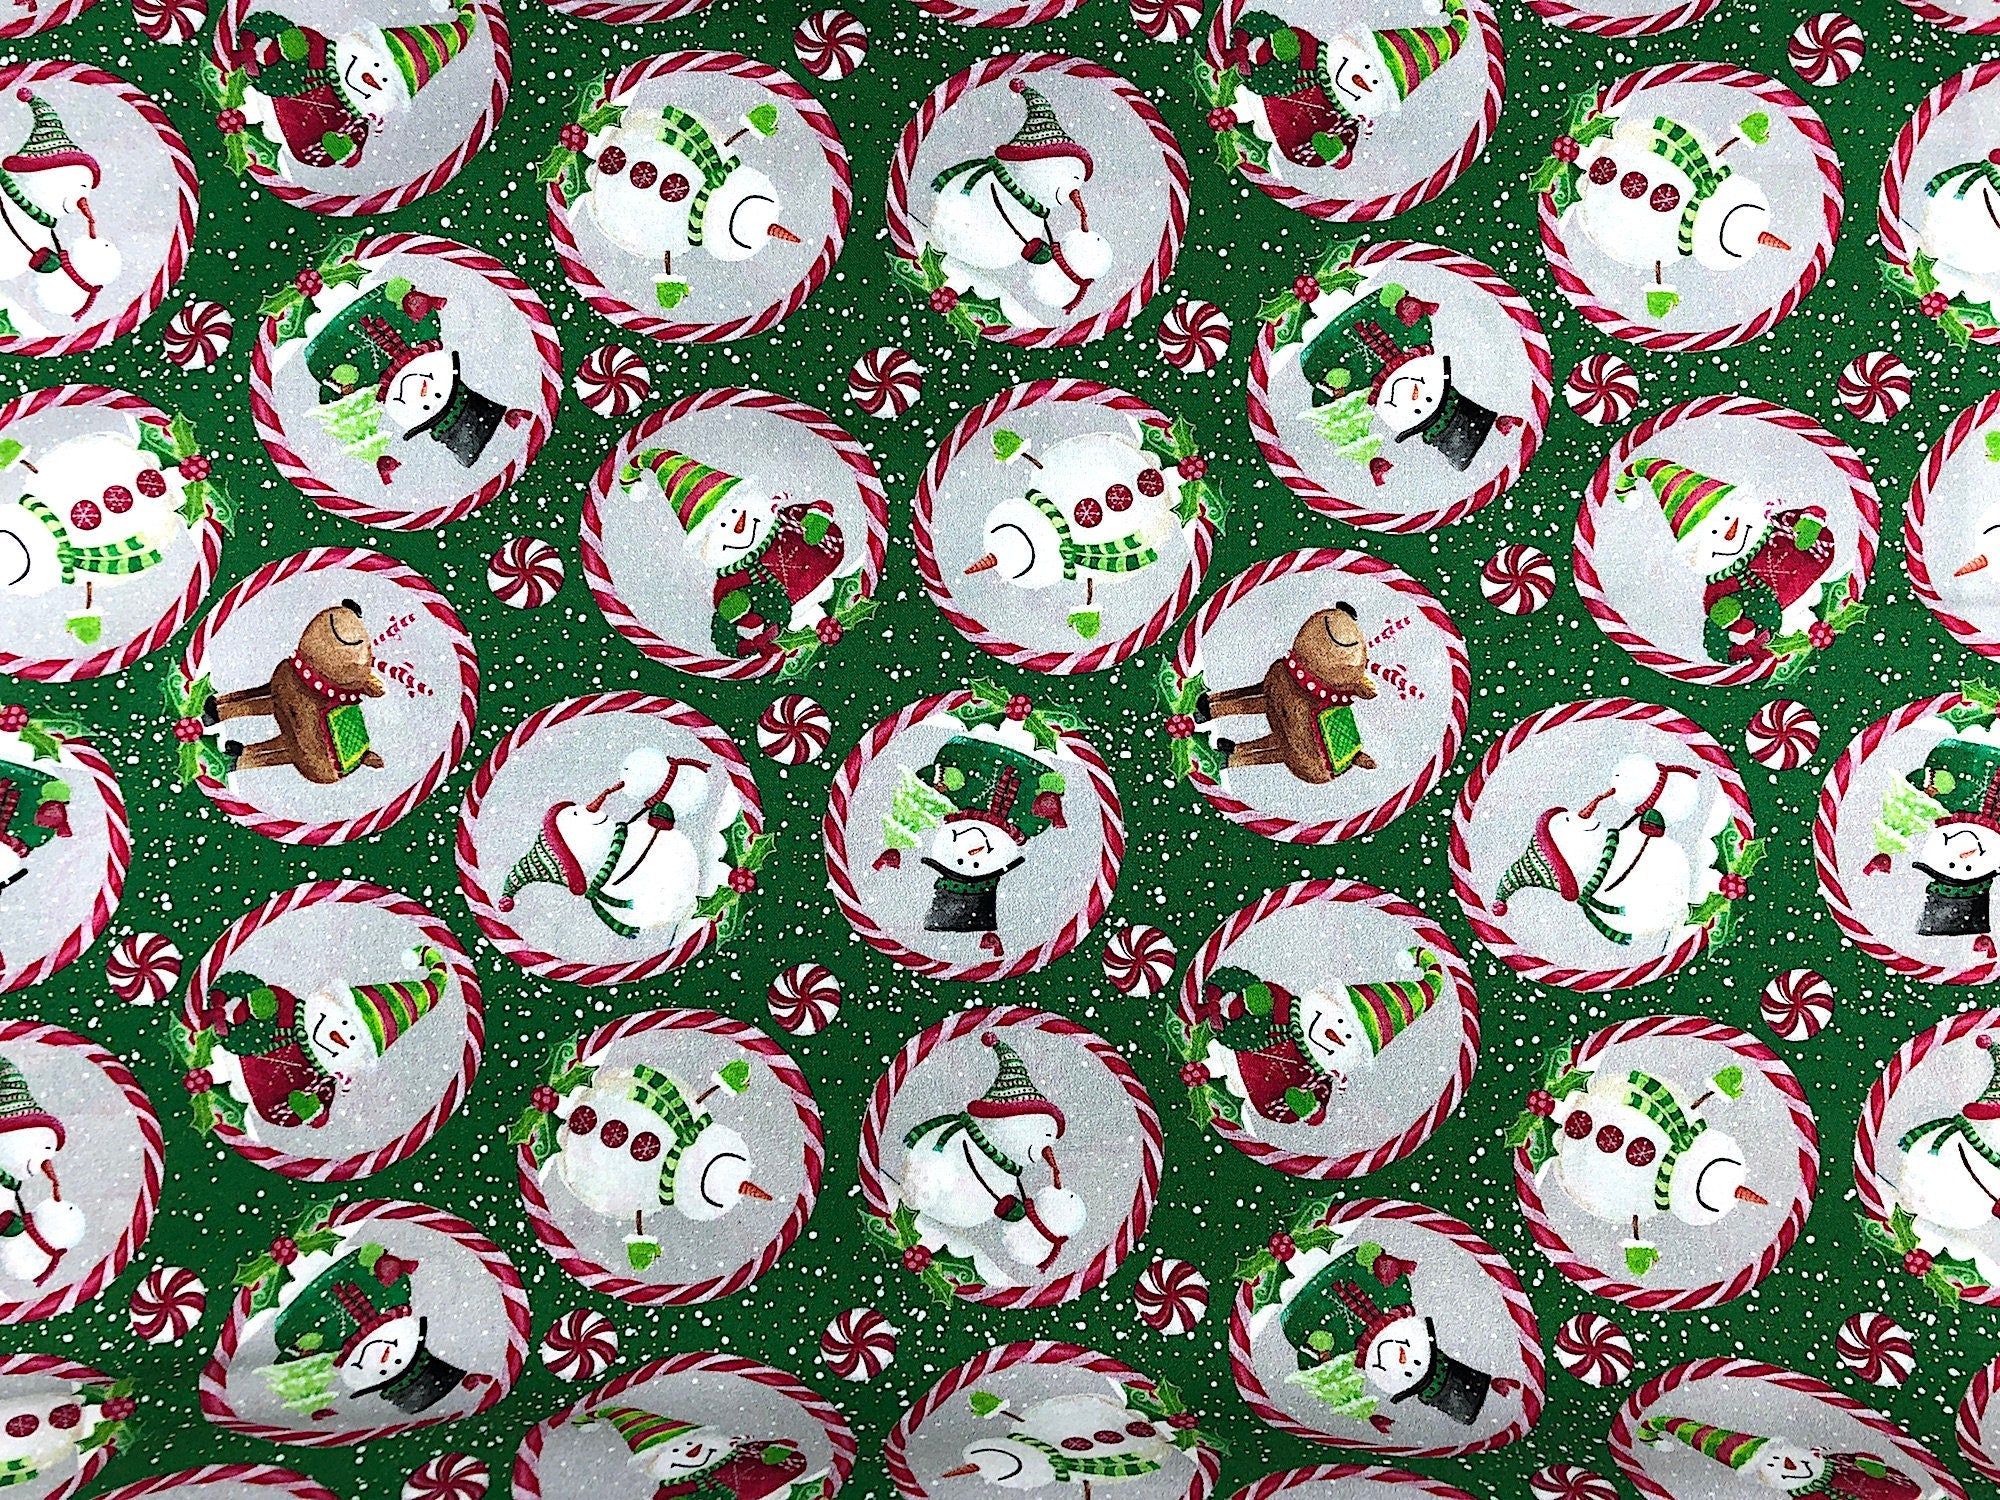 This Christmas Fabric is covered with Snowmen in different poses and outfits. They are in a circle of peppermint and there are peppermint candies scattered throughout the fabric.